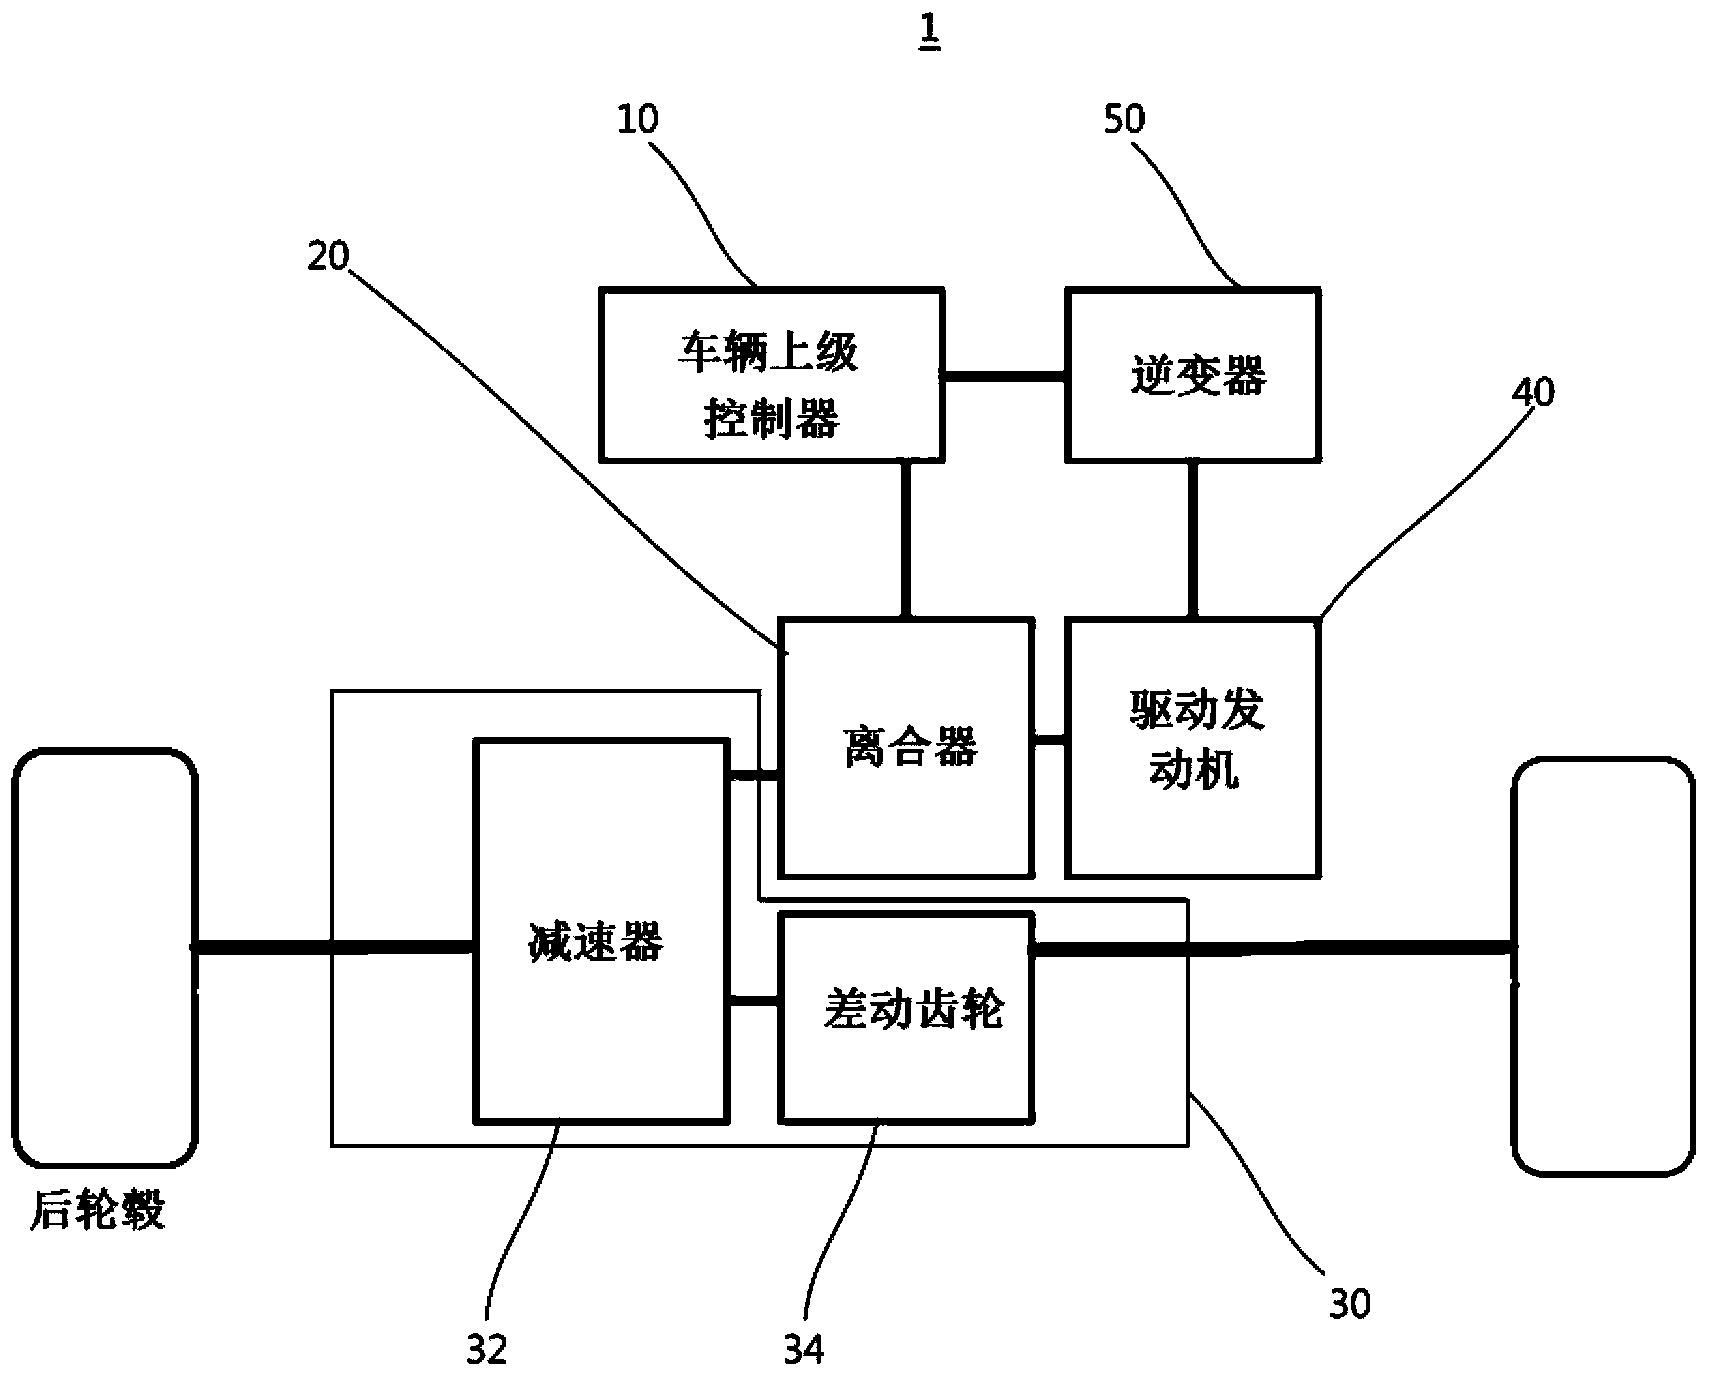 Driving control method for 4wd hybrid electric vehicle